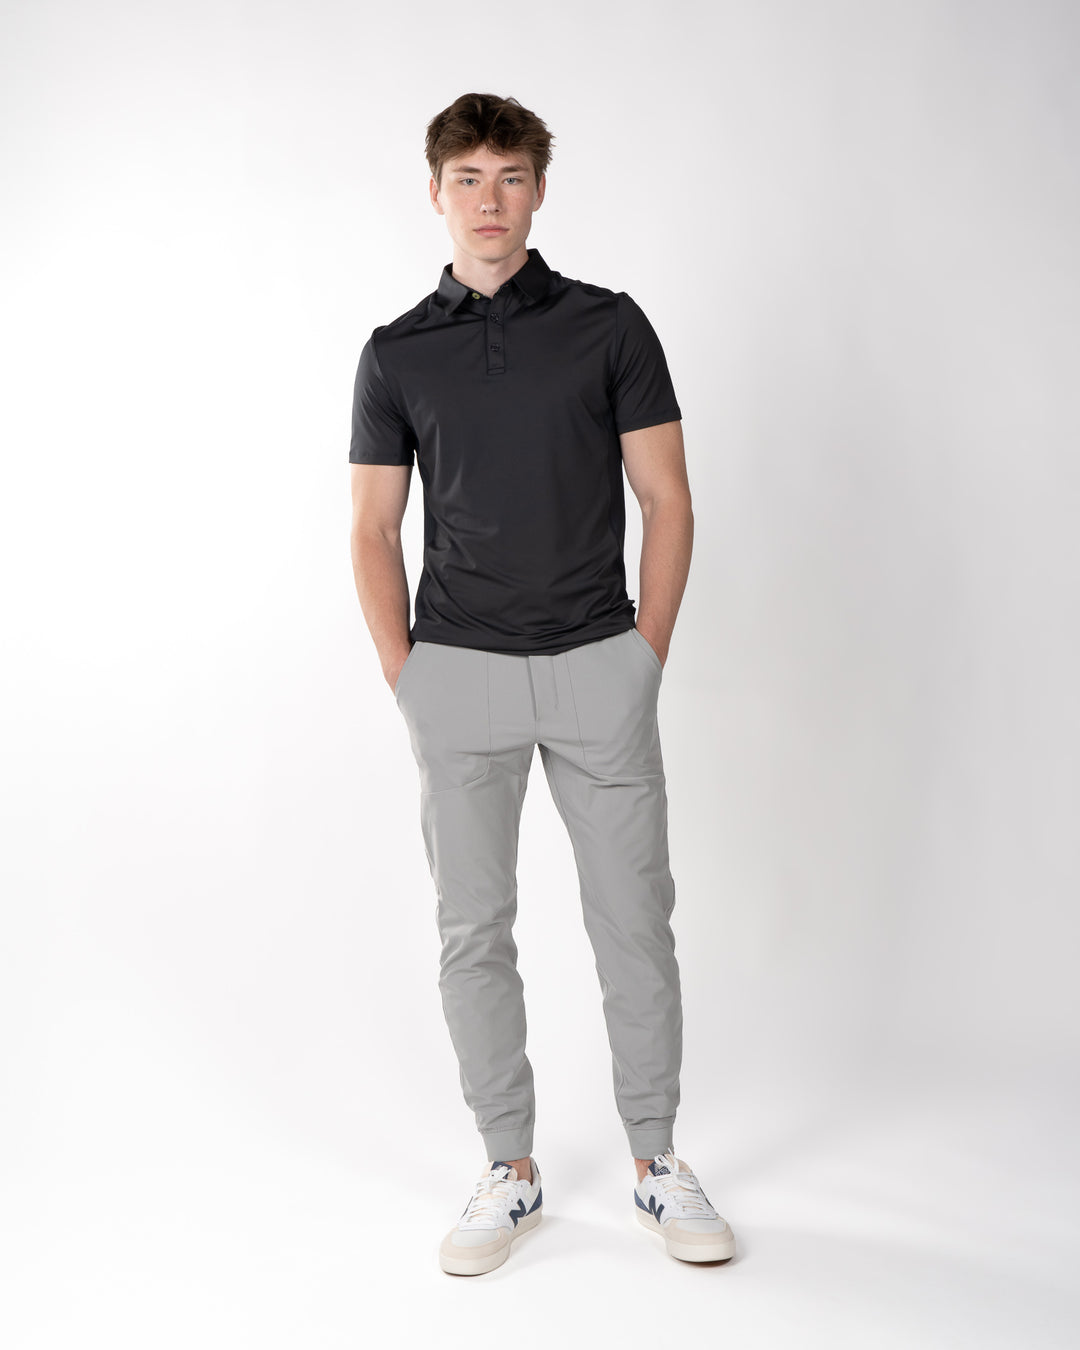 DS Mesh-Sided Polo - The MO Polo